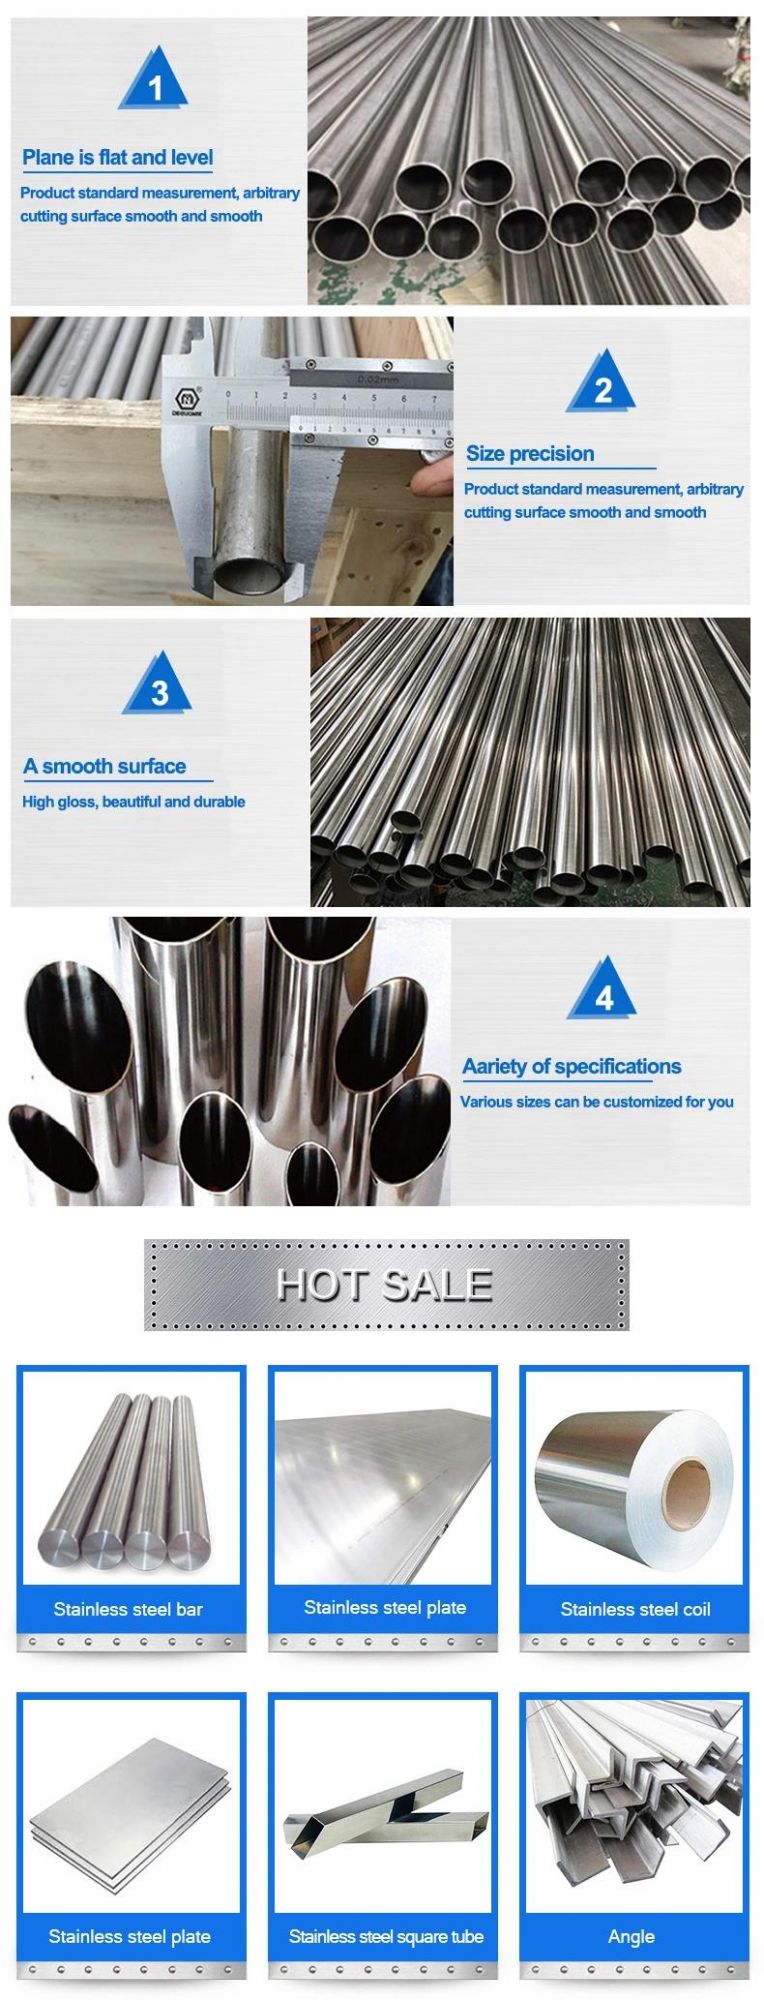 API 5L Grade B Carbon Steel Seamless Pipe ASTM A106 A36 BS 1387 Ms Galvanized Welded Round Steel Pipe / Building Steel Pipe / Industrial Pipe